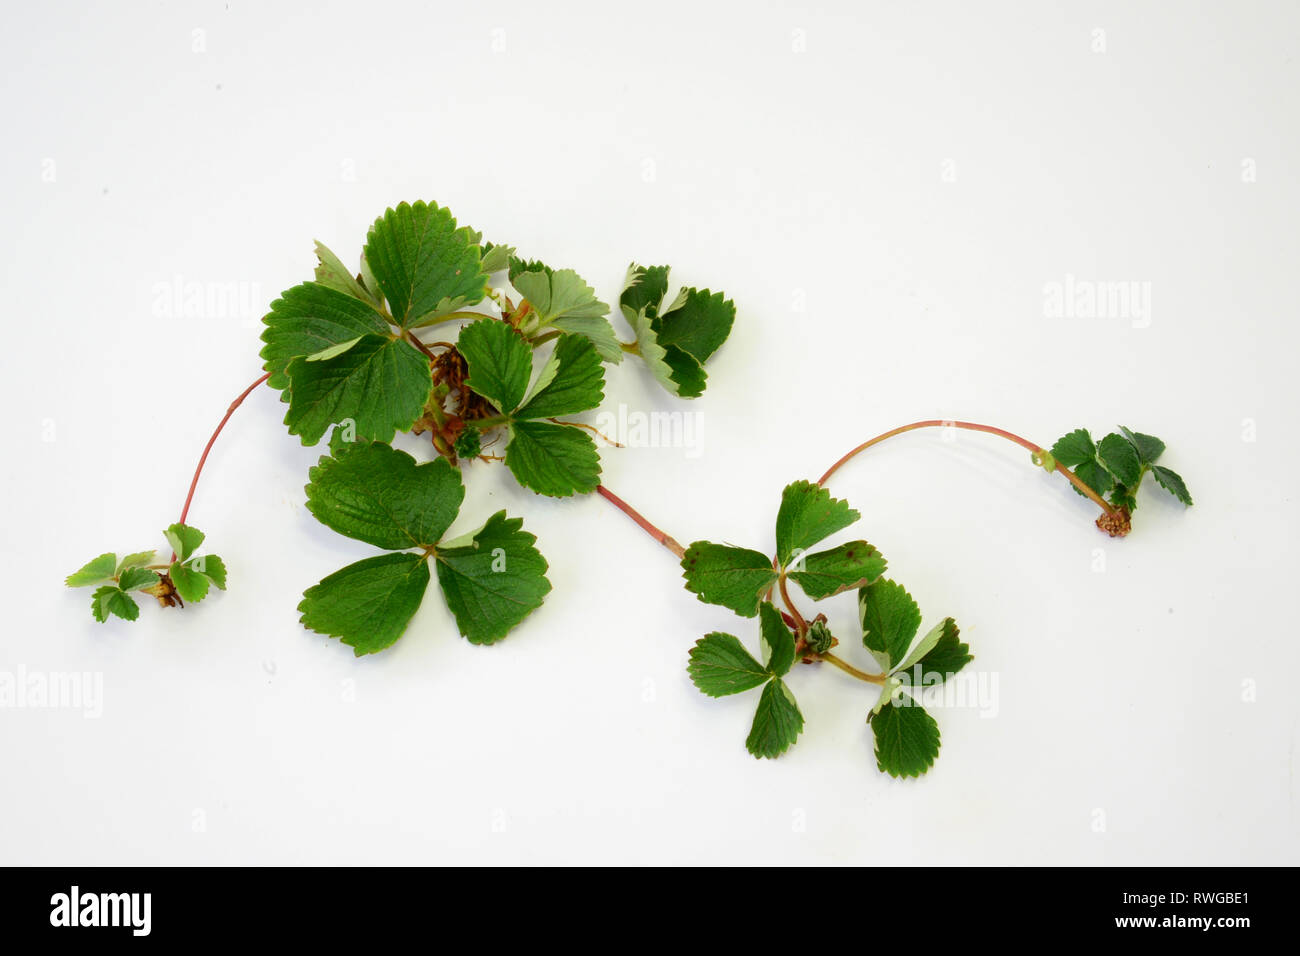 Strawberry (Fragaria x ananassa). Plant with runners. Studio picture against a white background. Germany Stock Photo